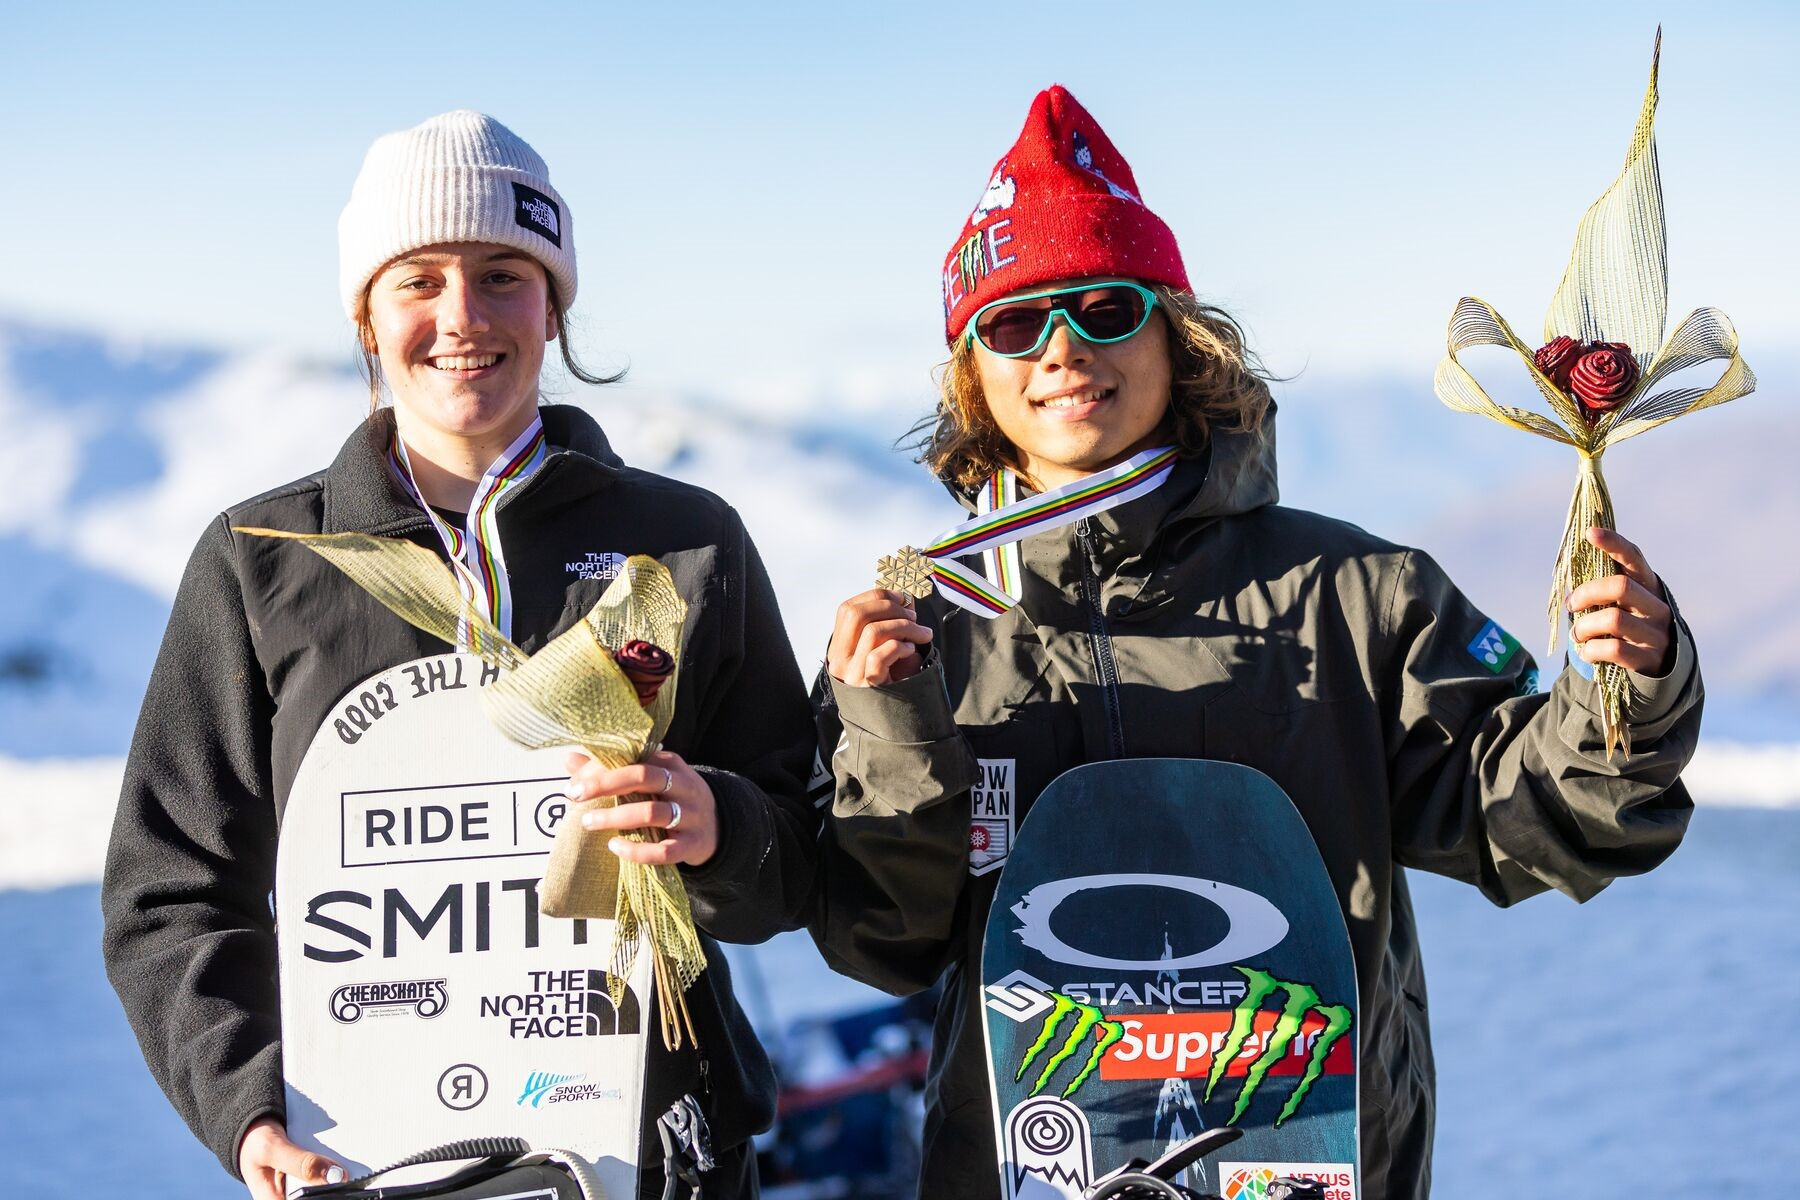 Hasegawa clinches snowboard double at FIS Park and Pipe Junior World Championships